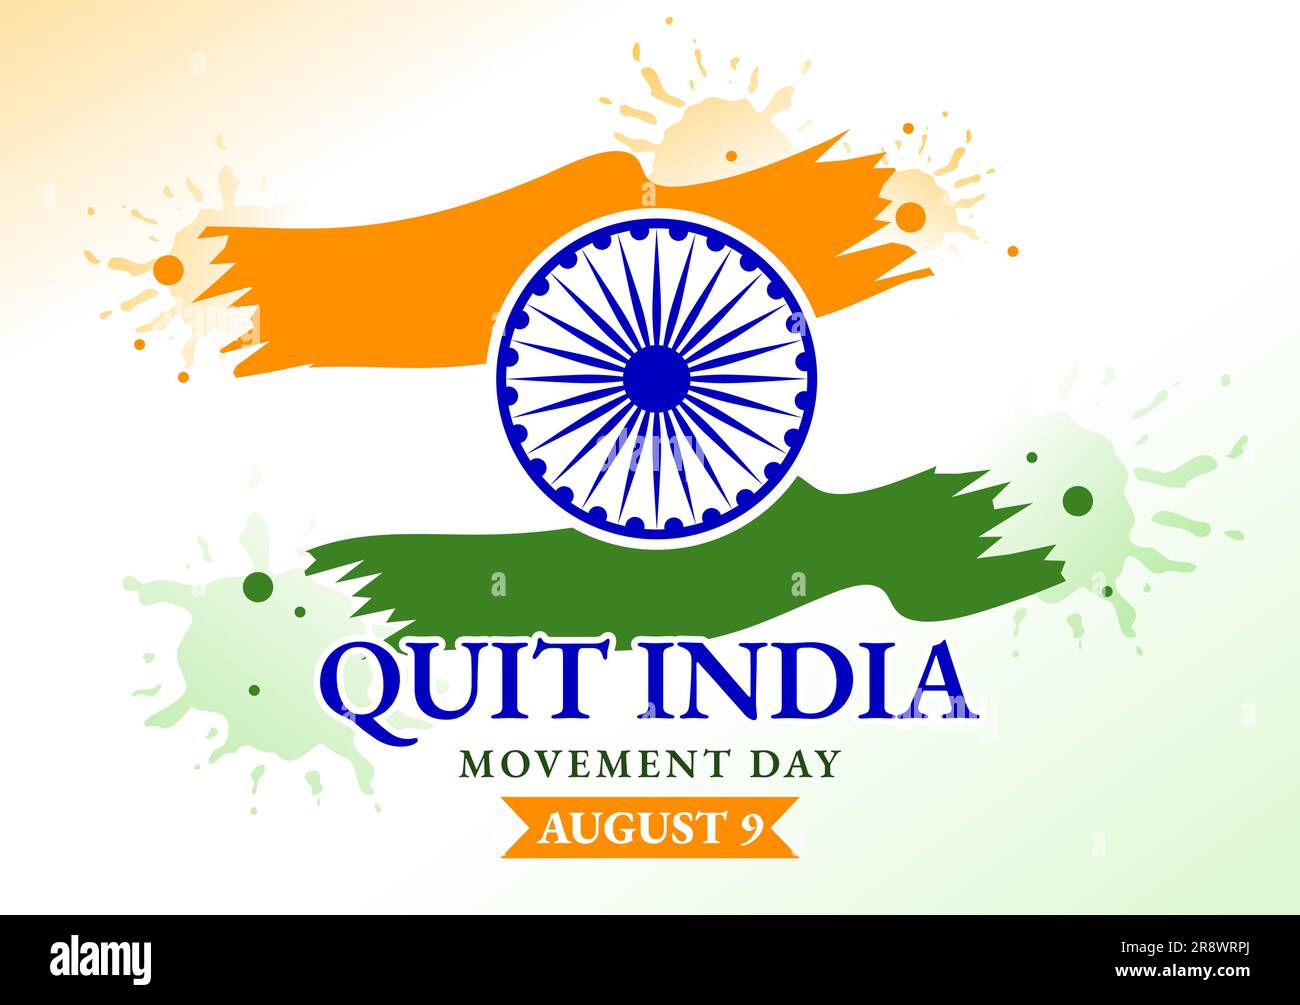 Quit India Movement Day Vector Illustration on 9 August with Indian Flag and People Silhouette in Flat Cartoon Hand Drawn Background Templates Stock Vector